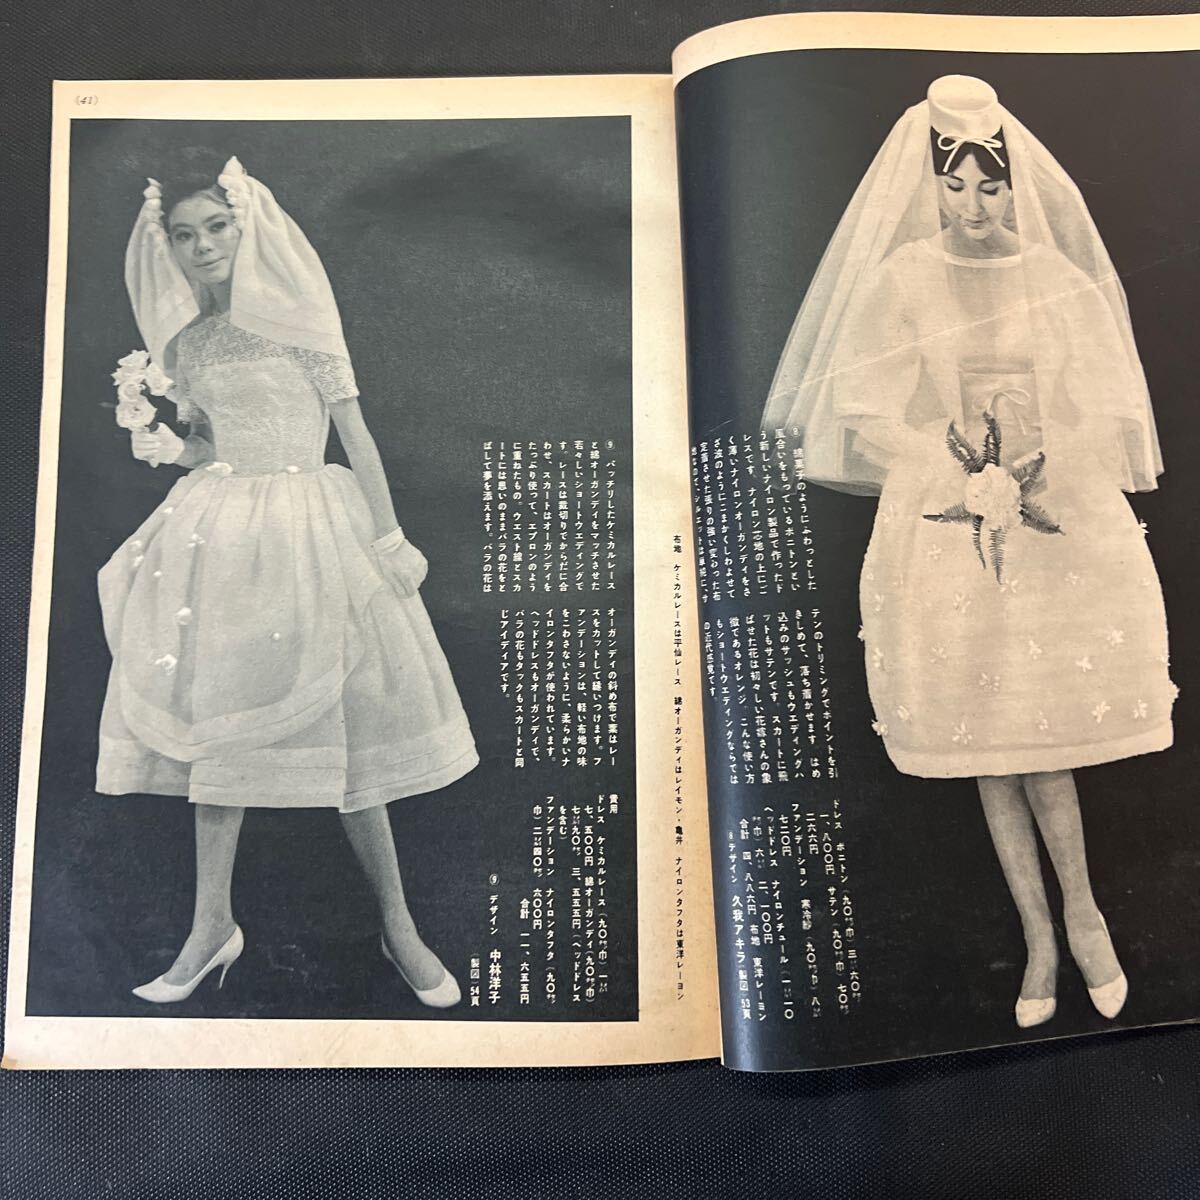  equipment . magazine so-en 1960 year 9 month number culture clothes equipment .. publish department Showa era 35 year that time thing Vintage rare retro secondhand book Showa Retro attire research appendix only 